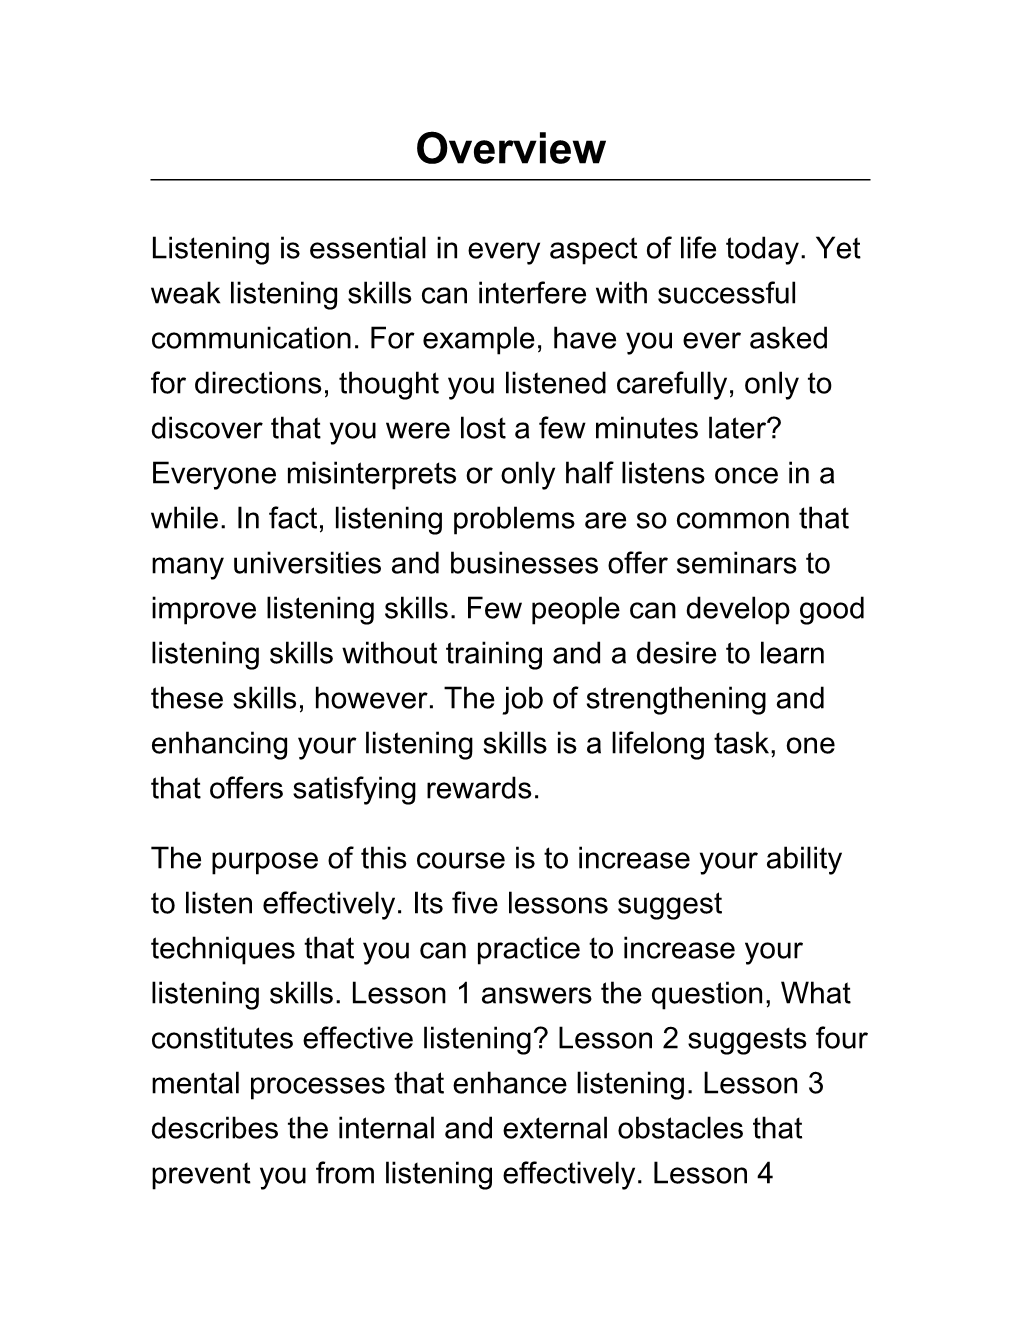 Listening Is Essential in Every Aspect of Life Today. Yet Weak Listening Skills Can Interfere